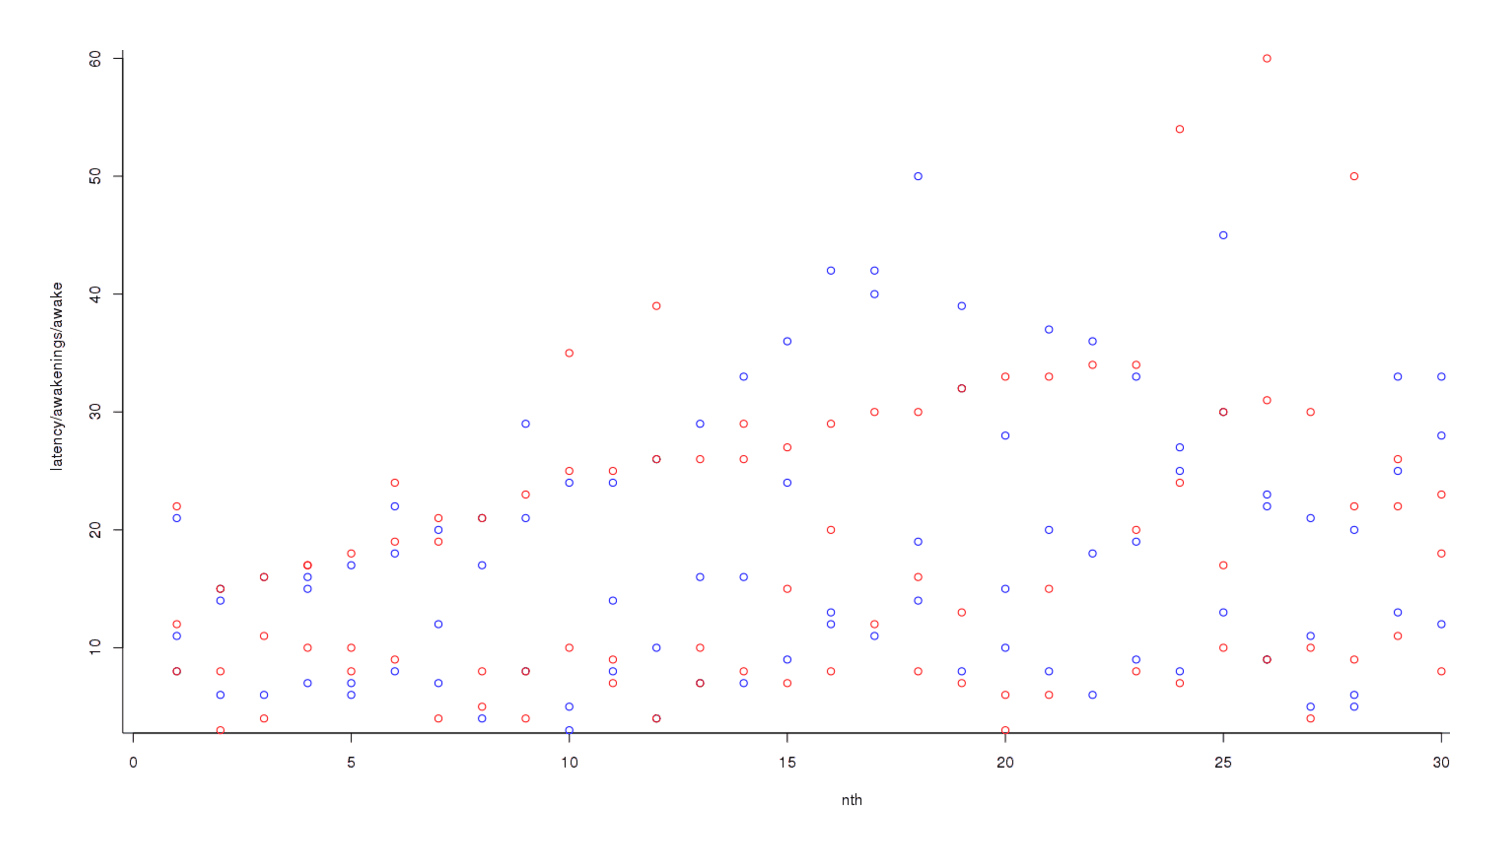 Plotting raw data of on and off-potassium nights, in a loosely chronological order